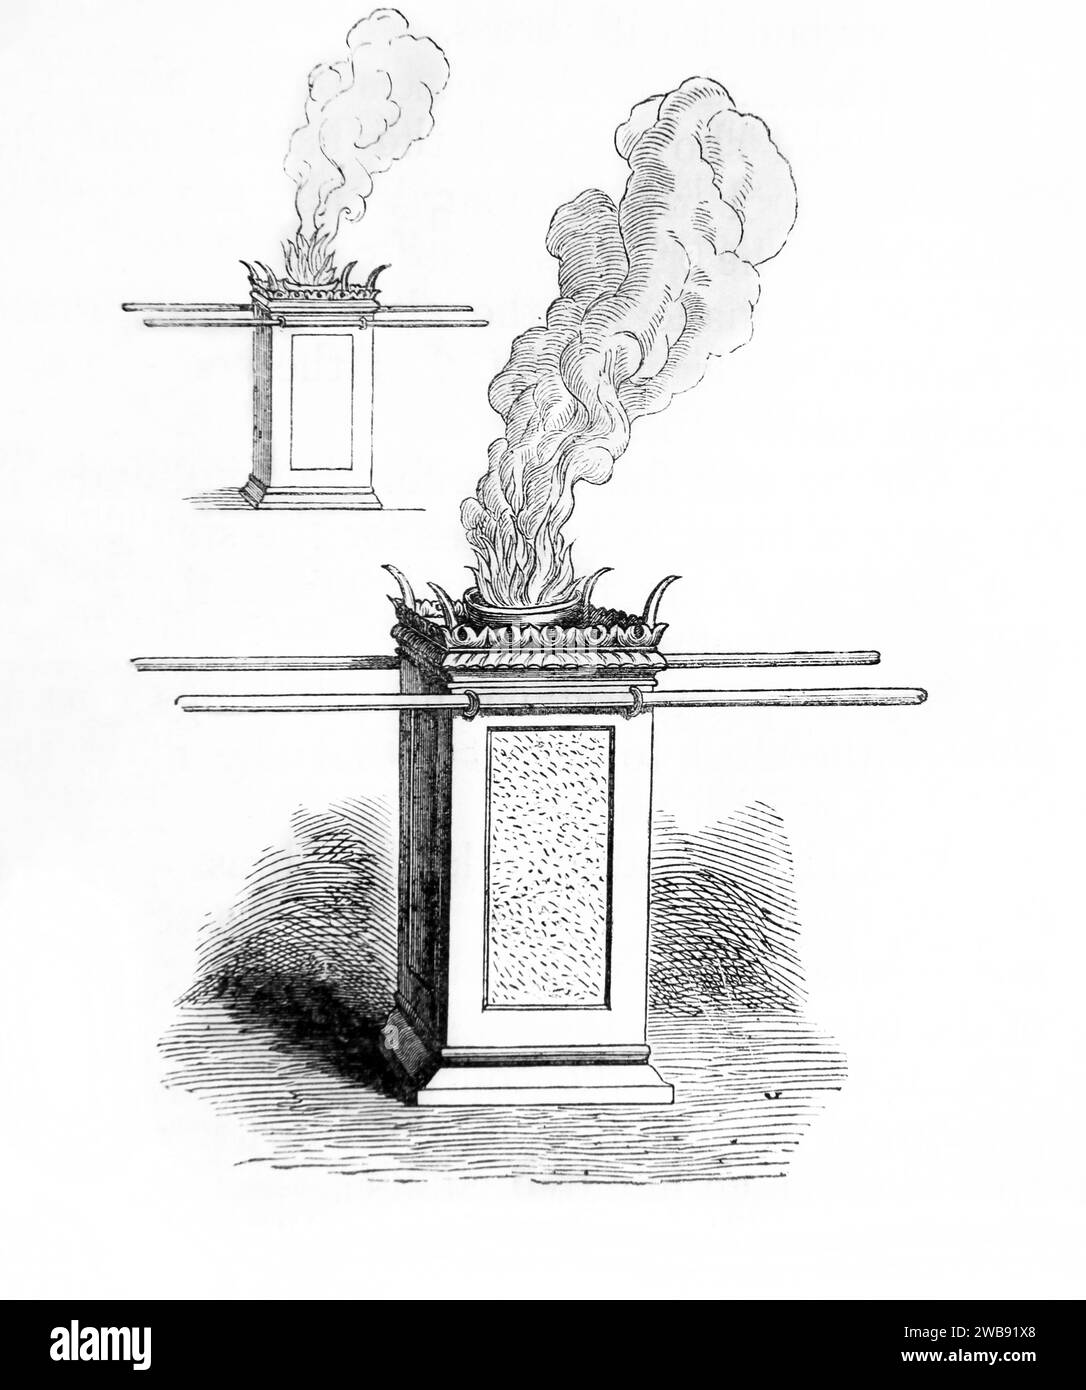 Wood Engraving of the Altar of Incense at the Tabernacle from the Illustrated Family Bible Stock Photo